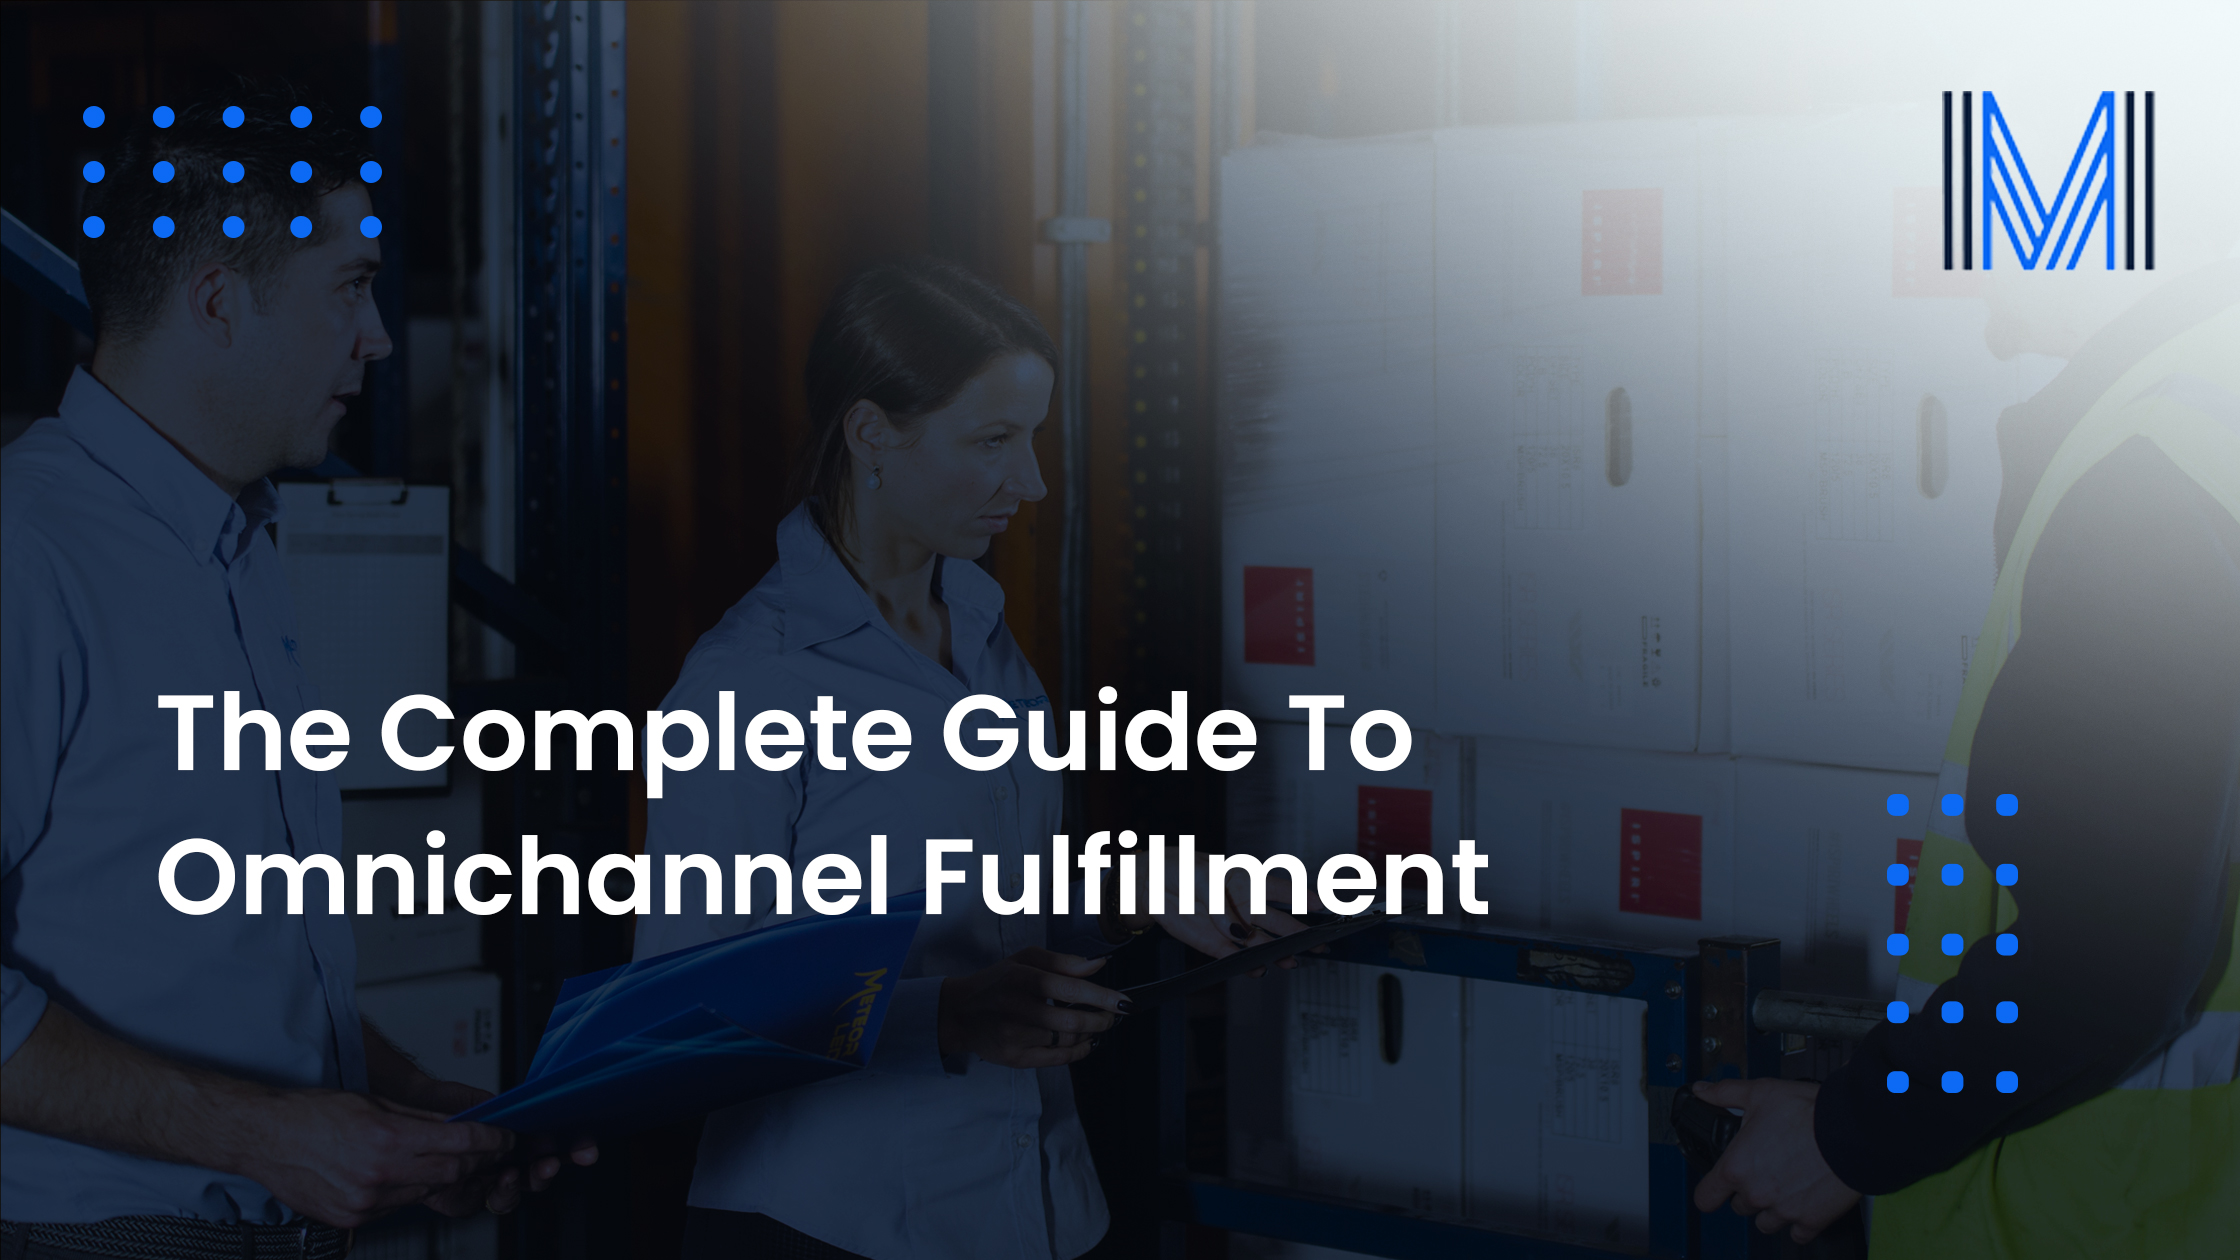 The Complete Guide To Omnichannel Fulfillment